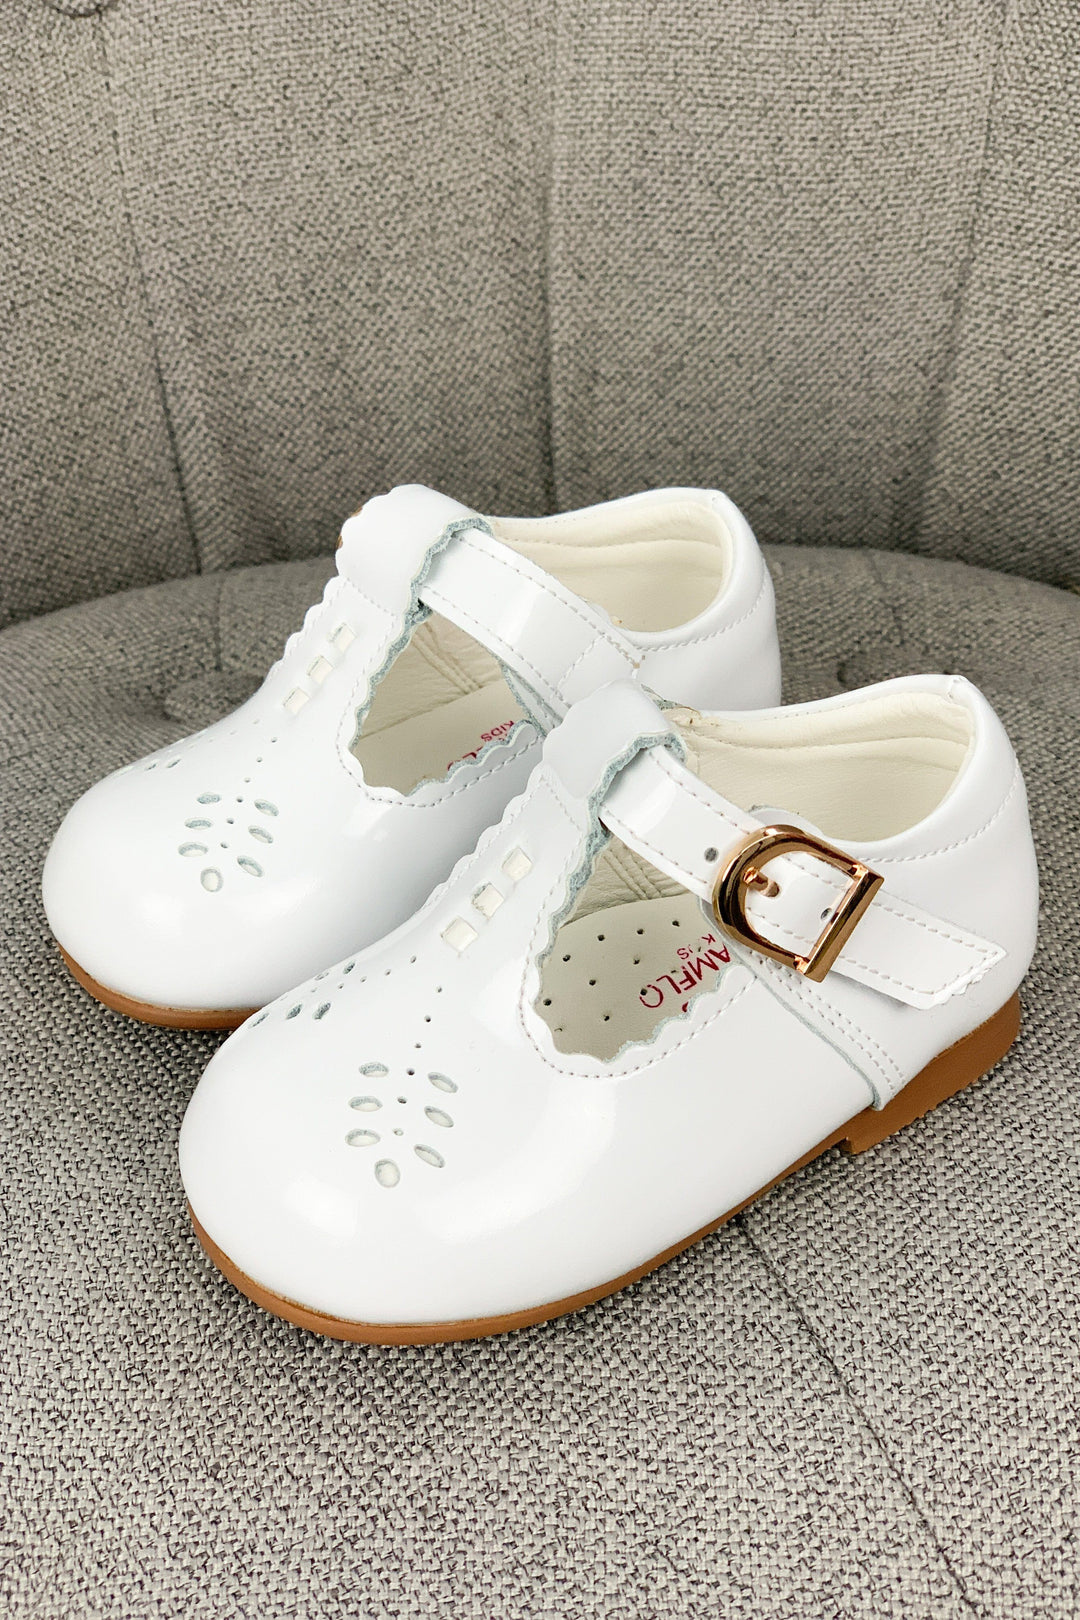 Caramelo Kids "Beatrice" Patent Leather T-Bar Shoes | iphoneandroidapplications